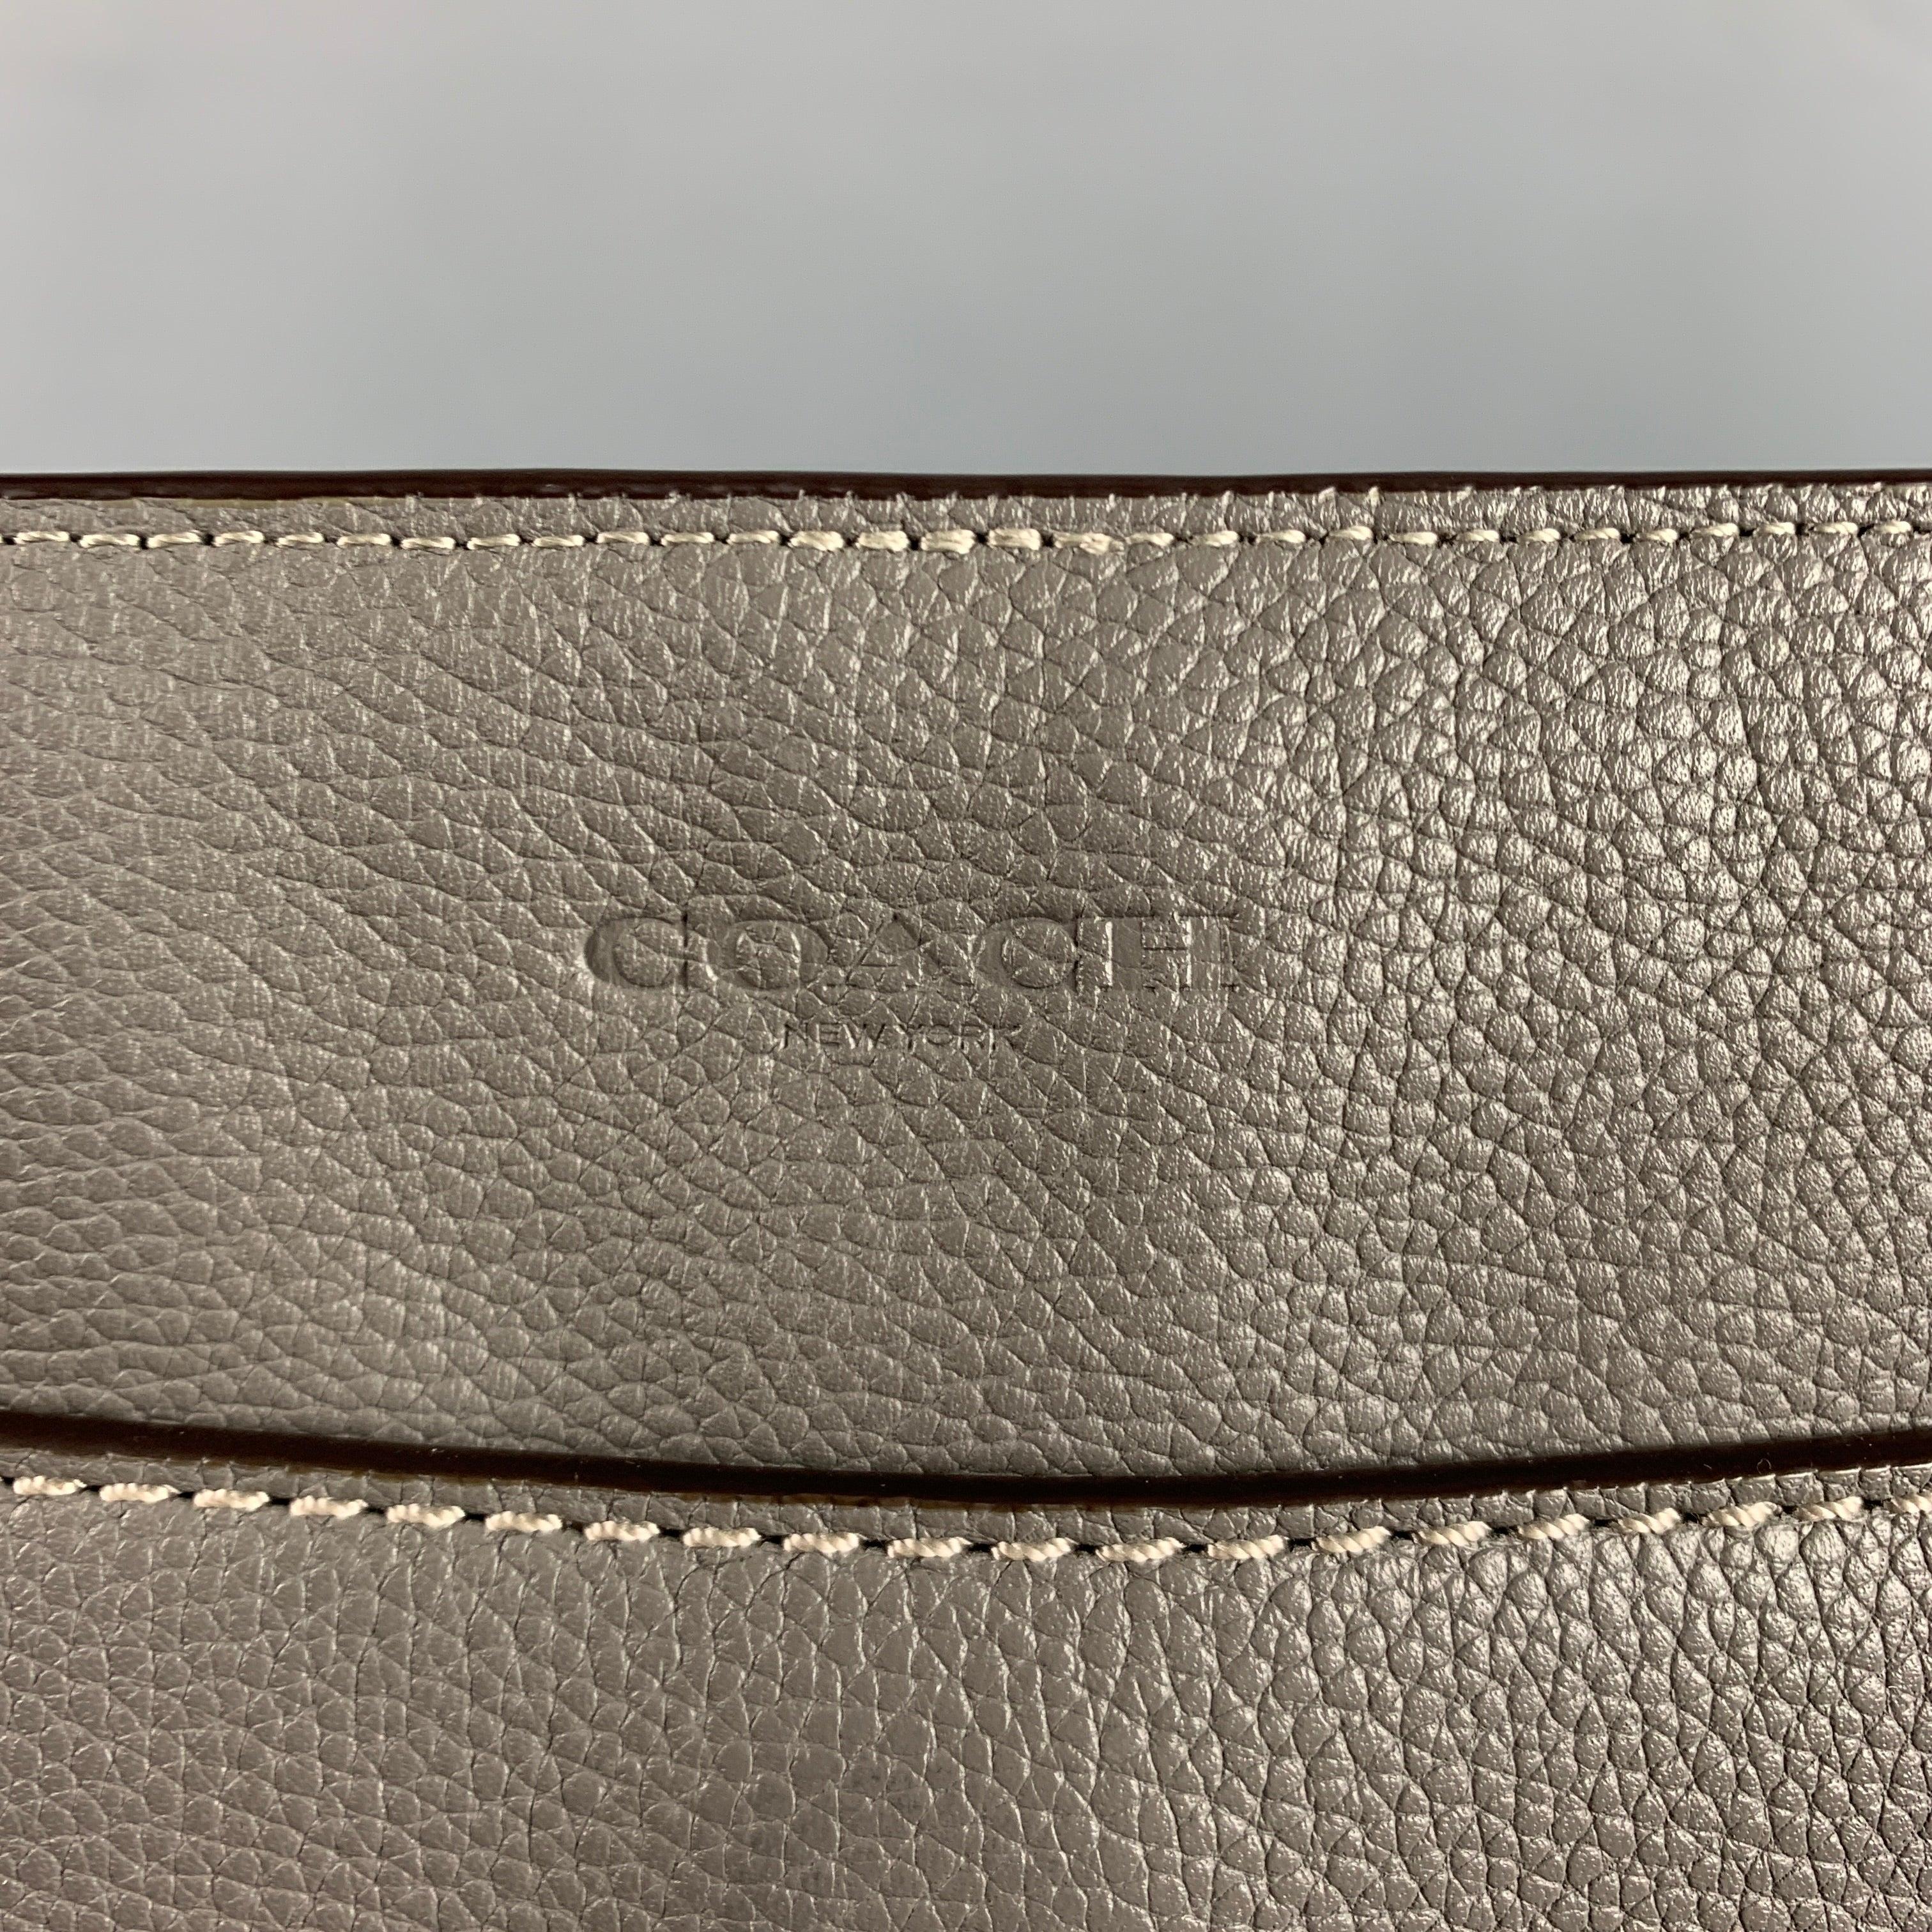 COACH Grey Black Pebble Grain Leather Cross Body Bag In Good Condition For Sale In San Francisco, CA